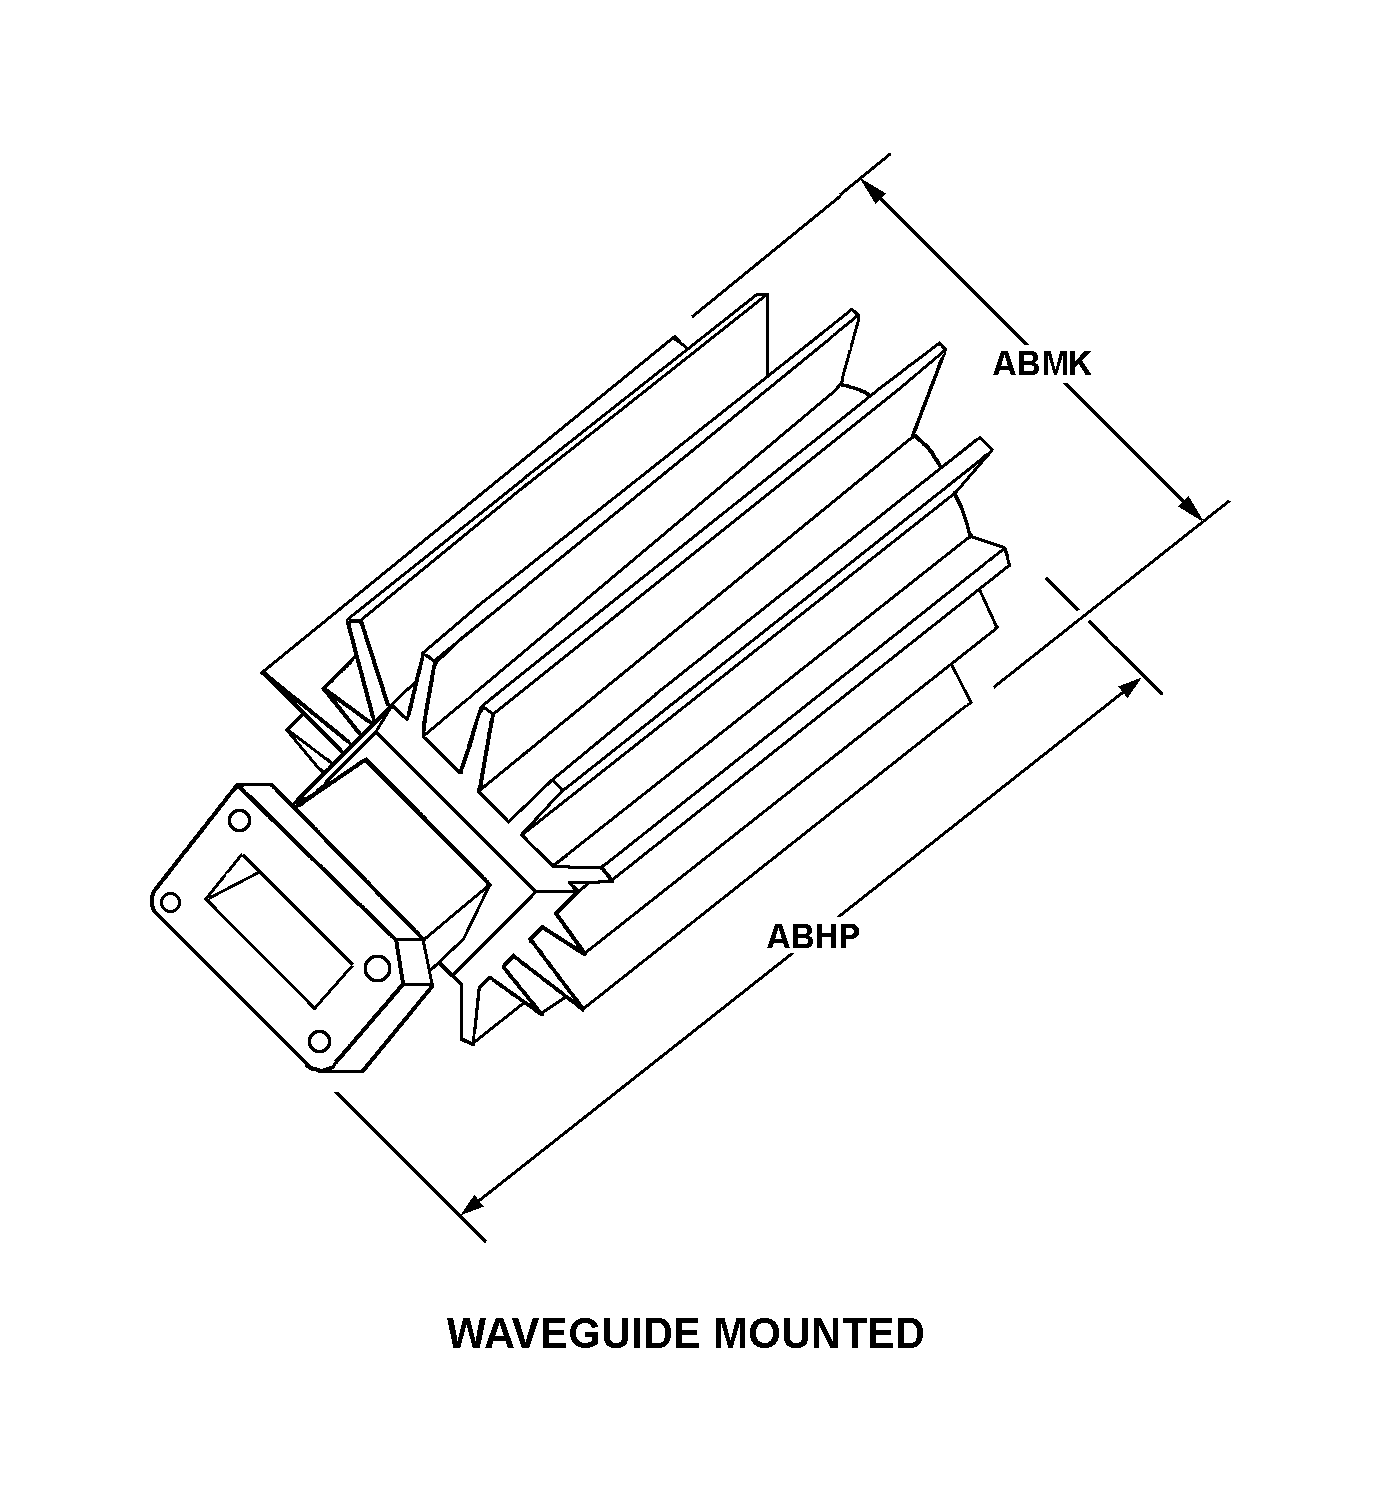 WAVEGUIDE MOUNTED style nsn 5985-01-629-5996